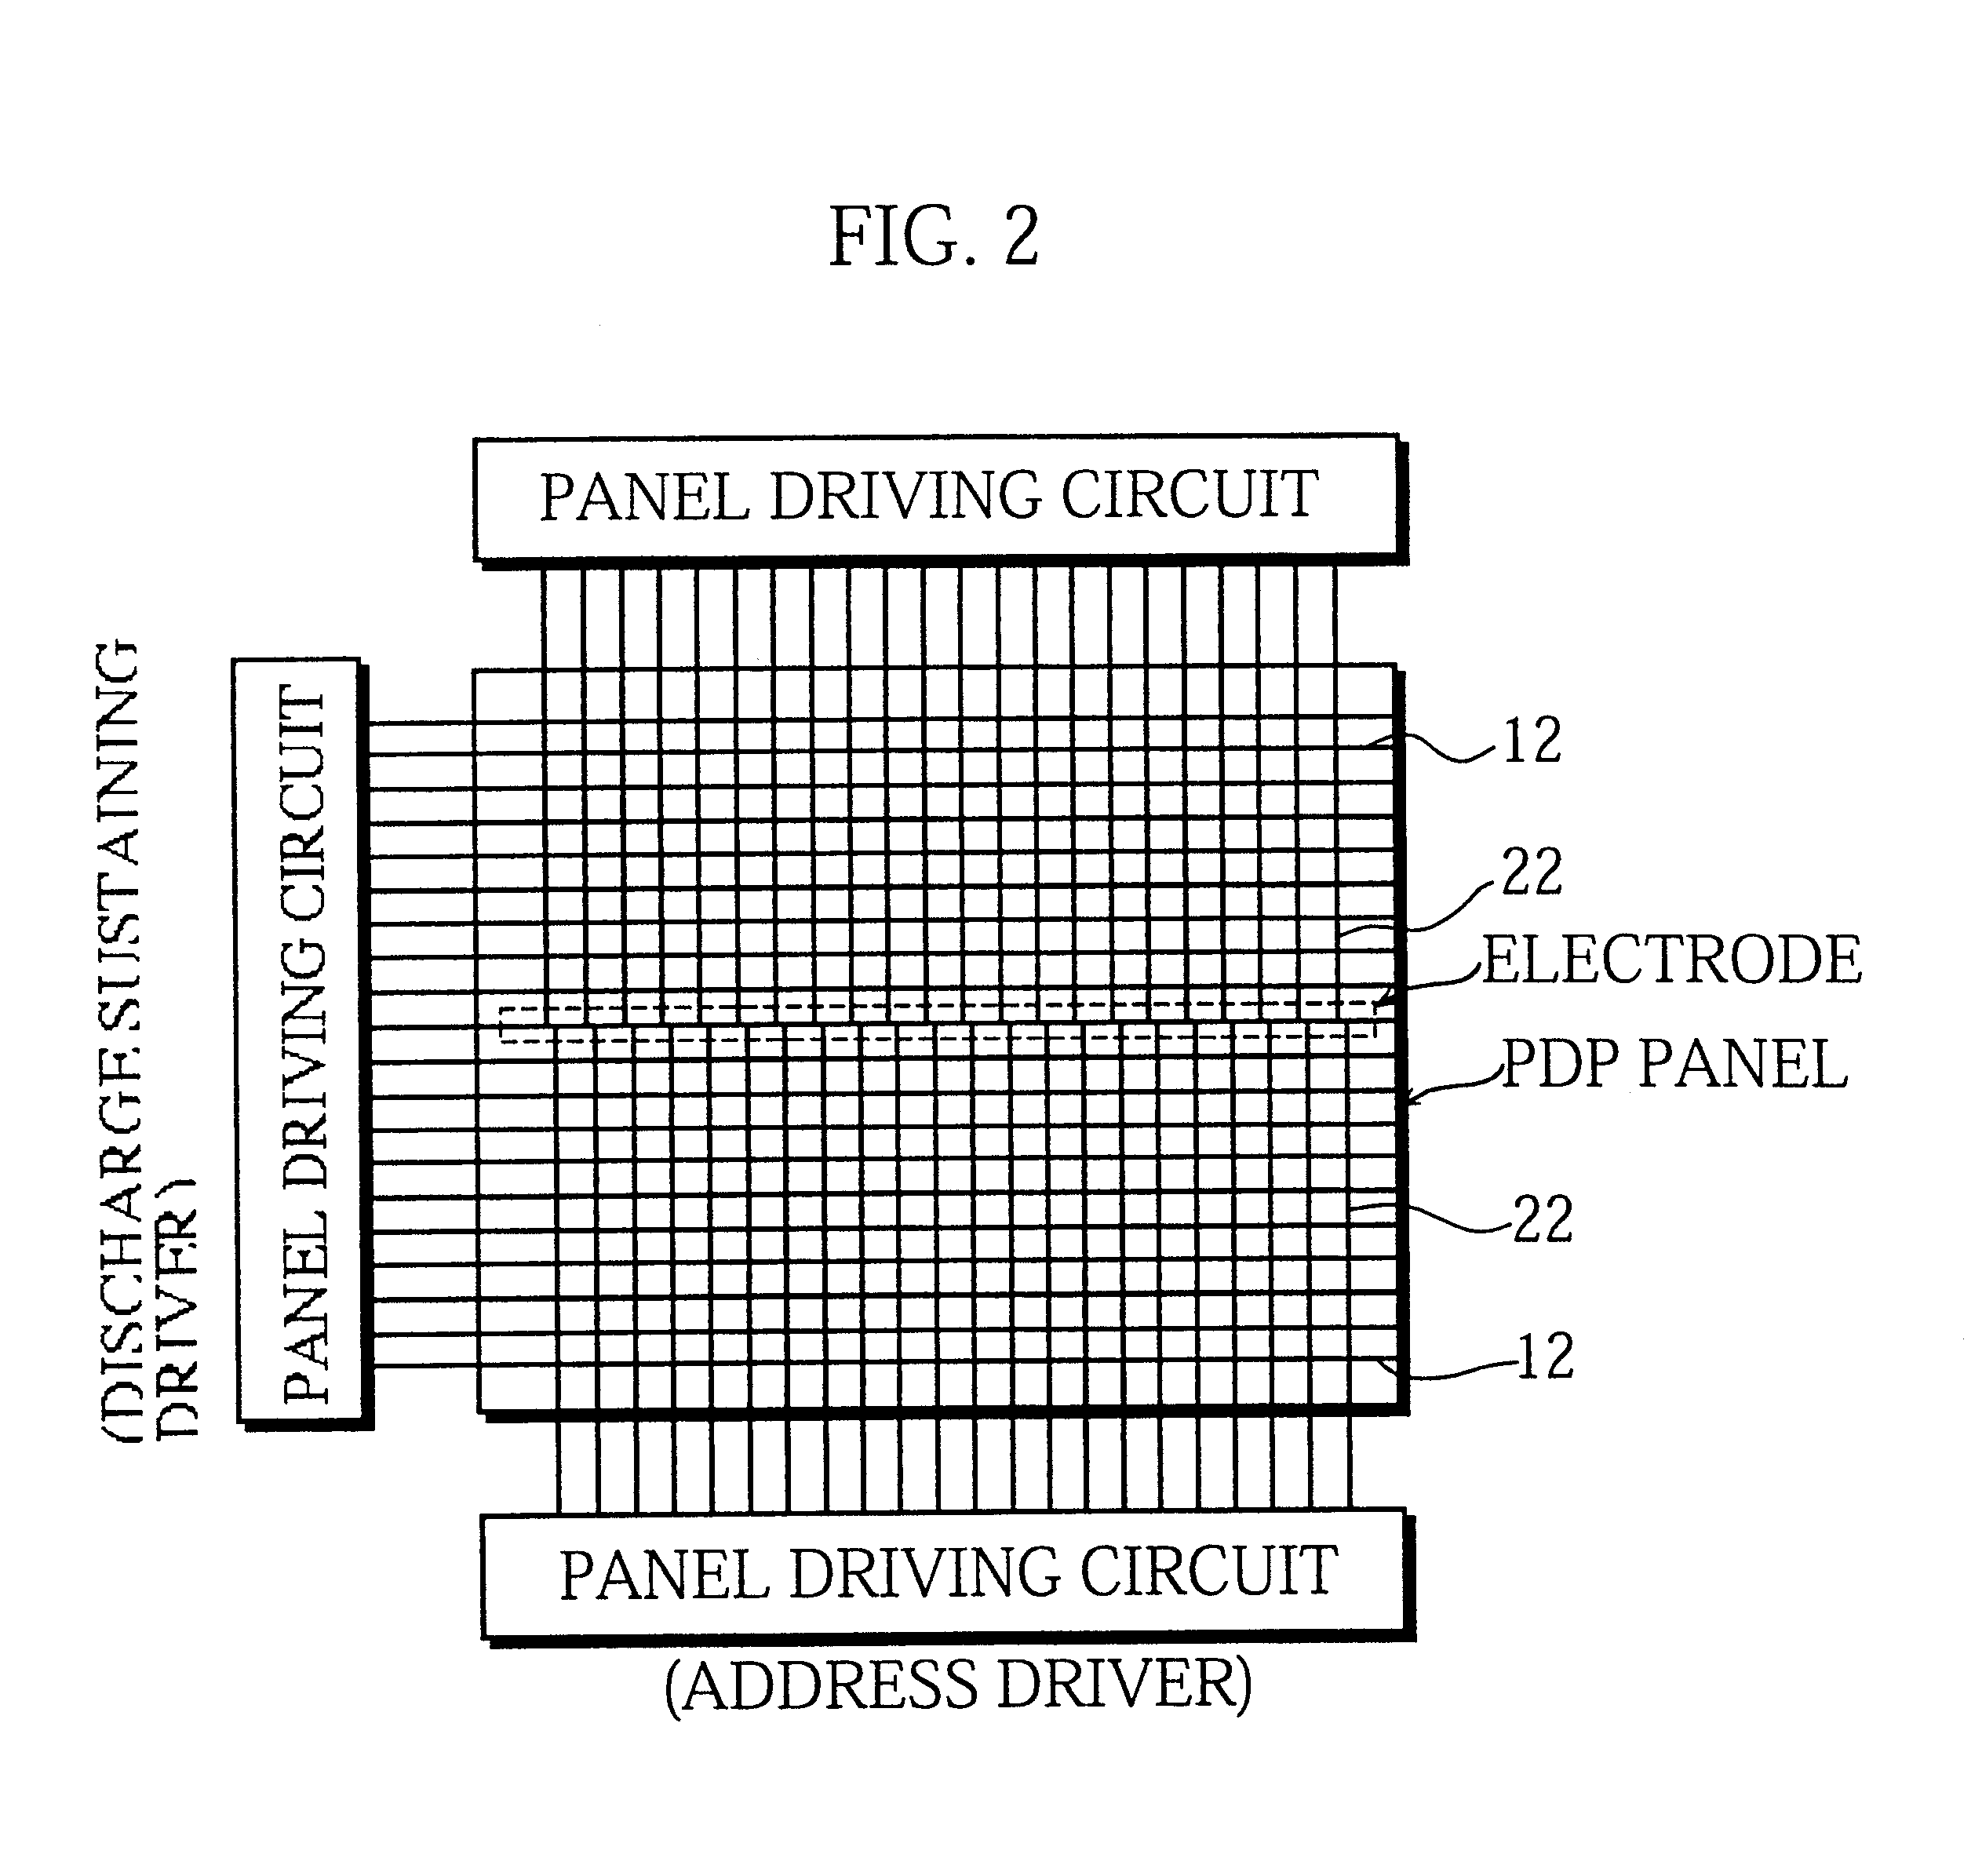 Plasma display panel manufacturing method for manufacturing a plasma display panel with superior picture quality, a manufacturing apparatus and a phosphor ink